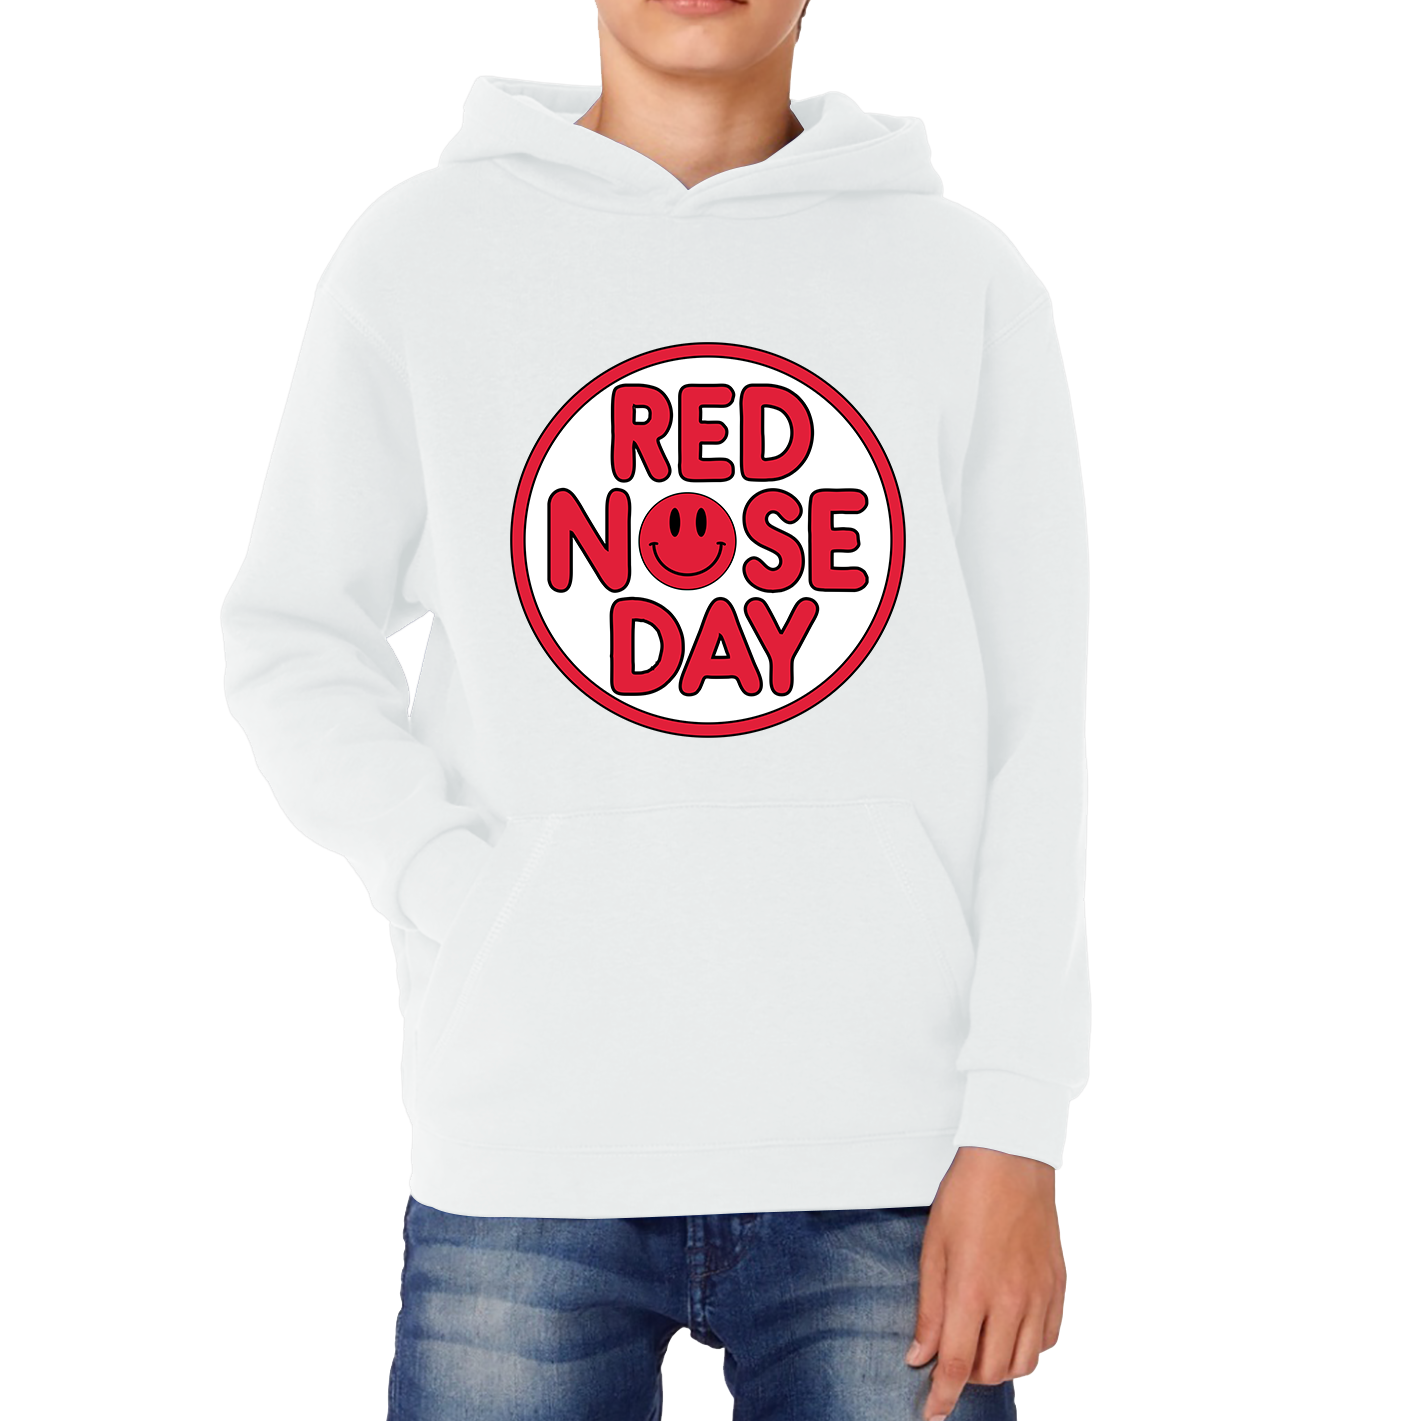 Smiley Face Red Nose Day Kids Hoodie. 50% Goes To Charity